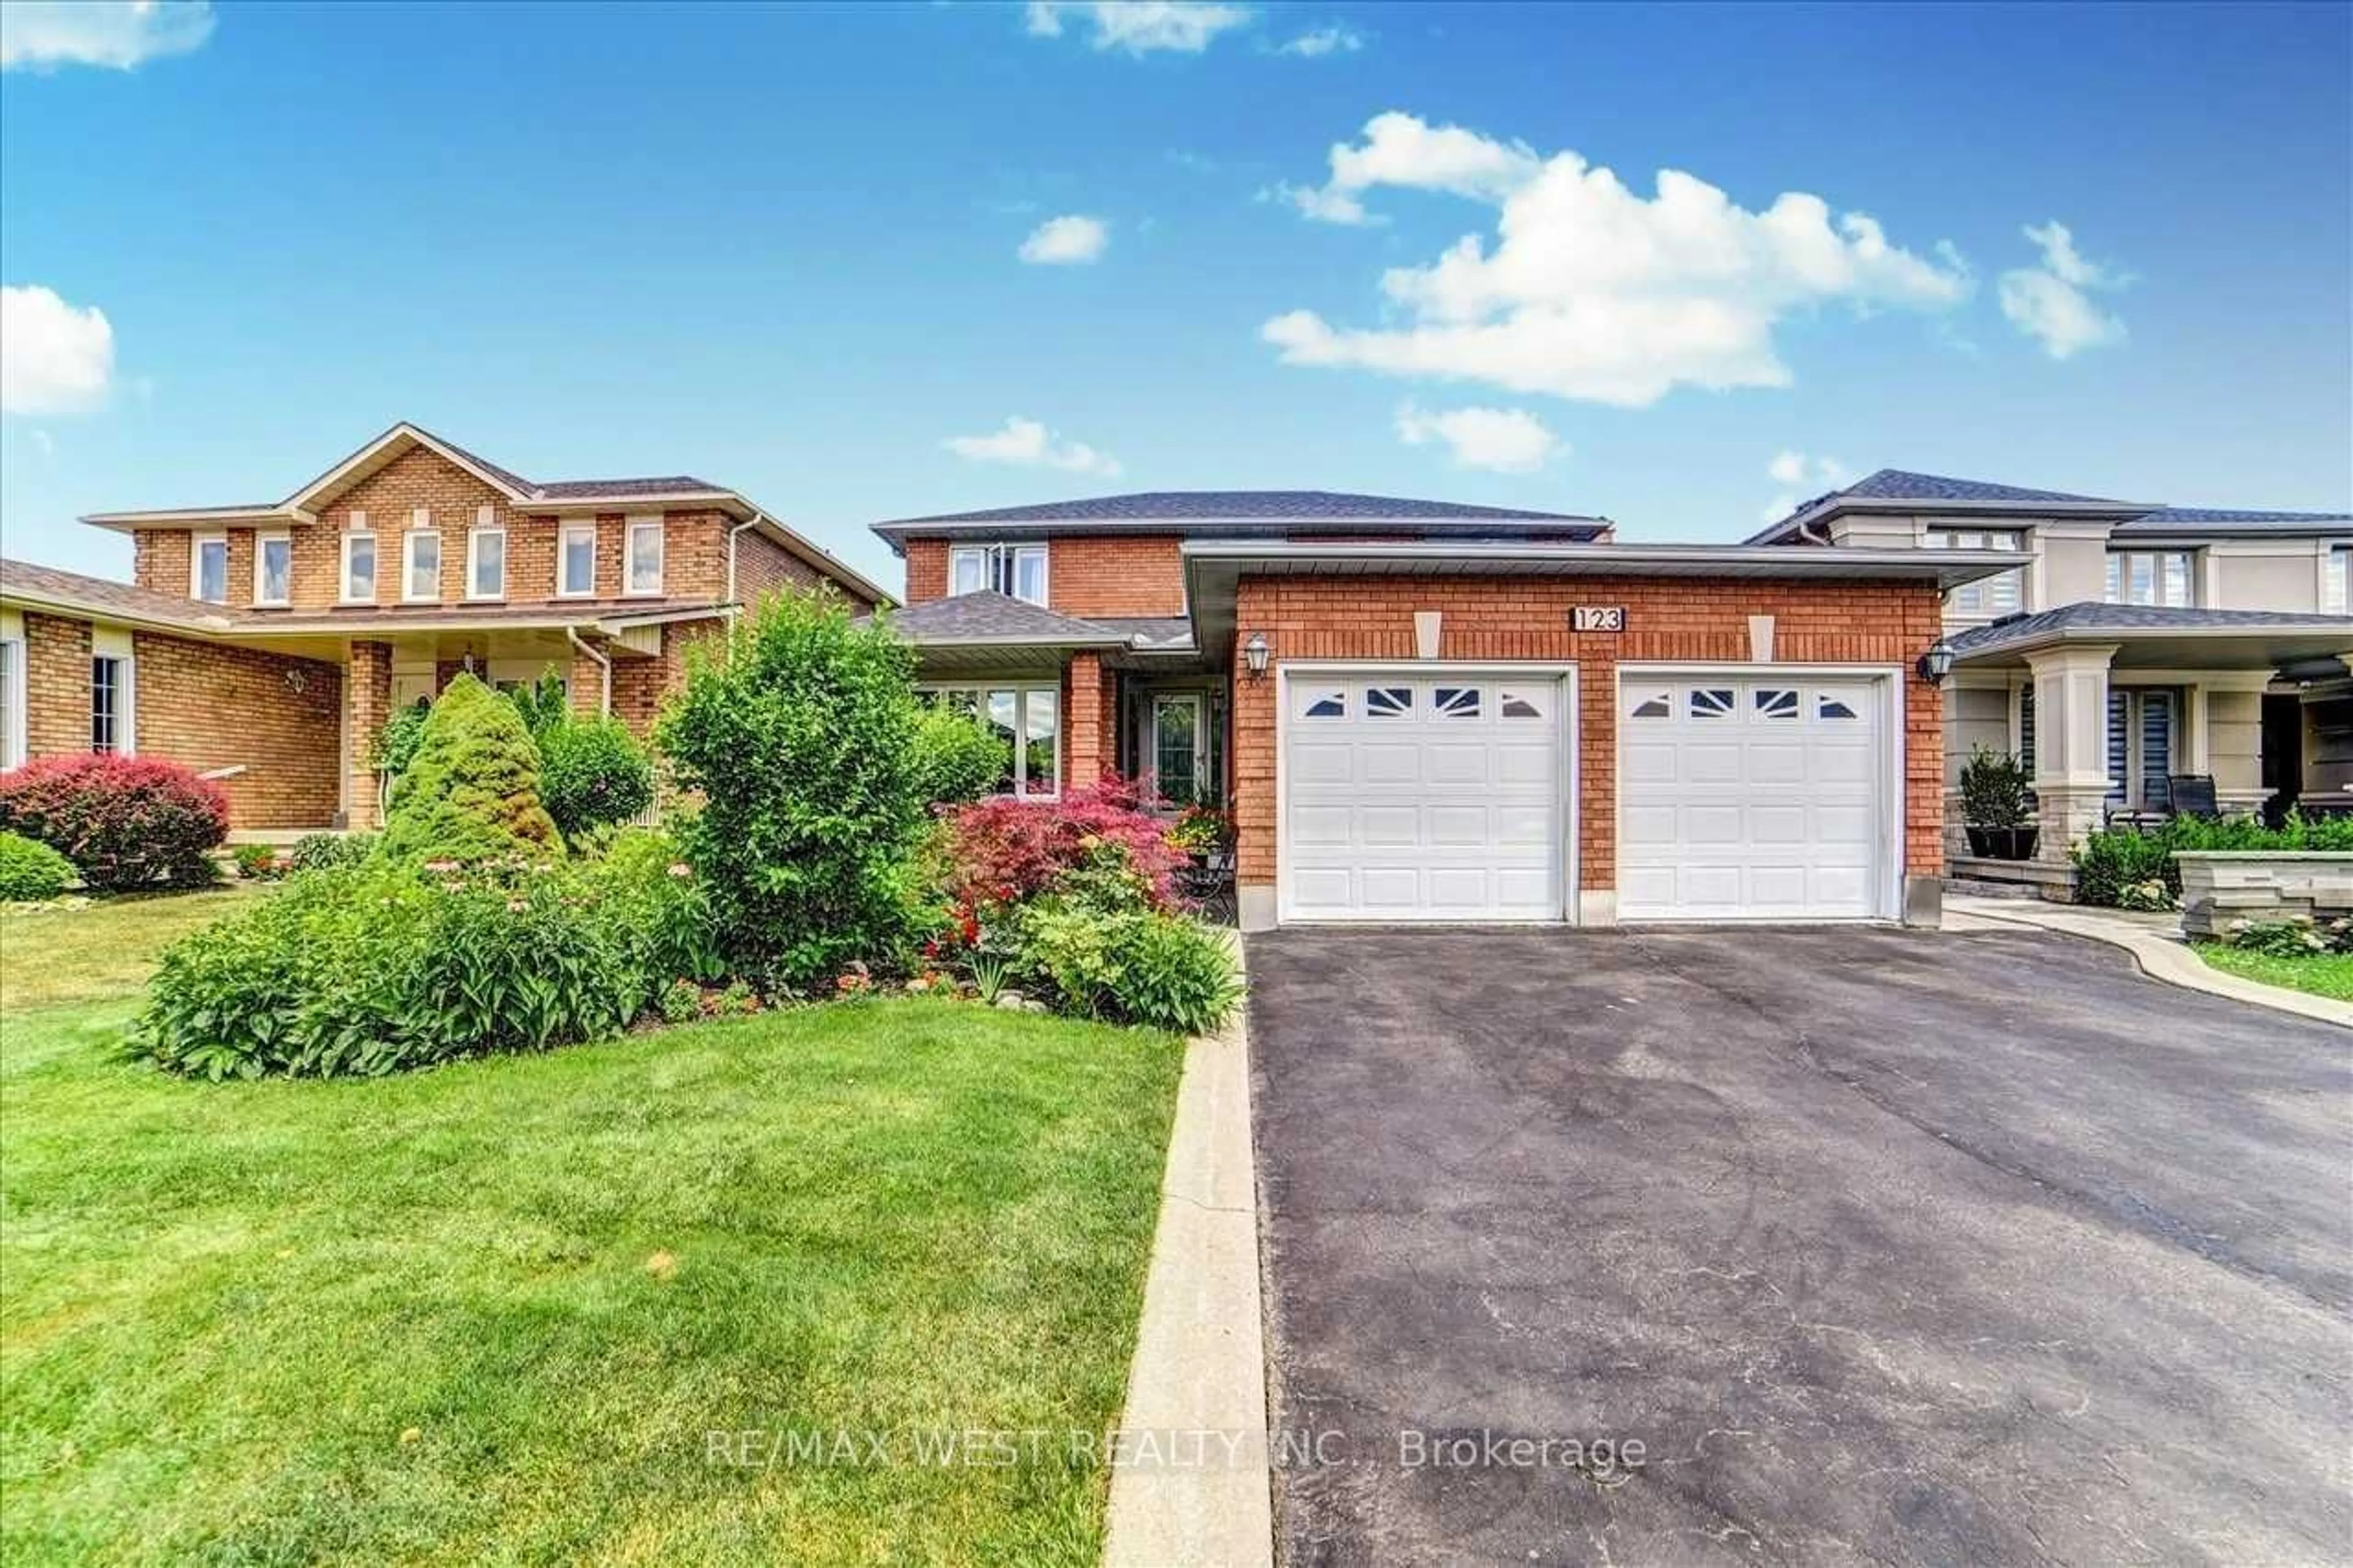 Frontside or backside of a home for 123 Mapes Ave, Vaughan Ontario L4L 8R9